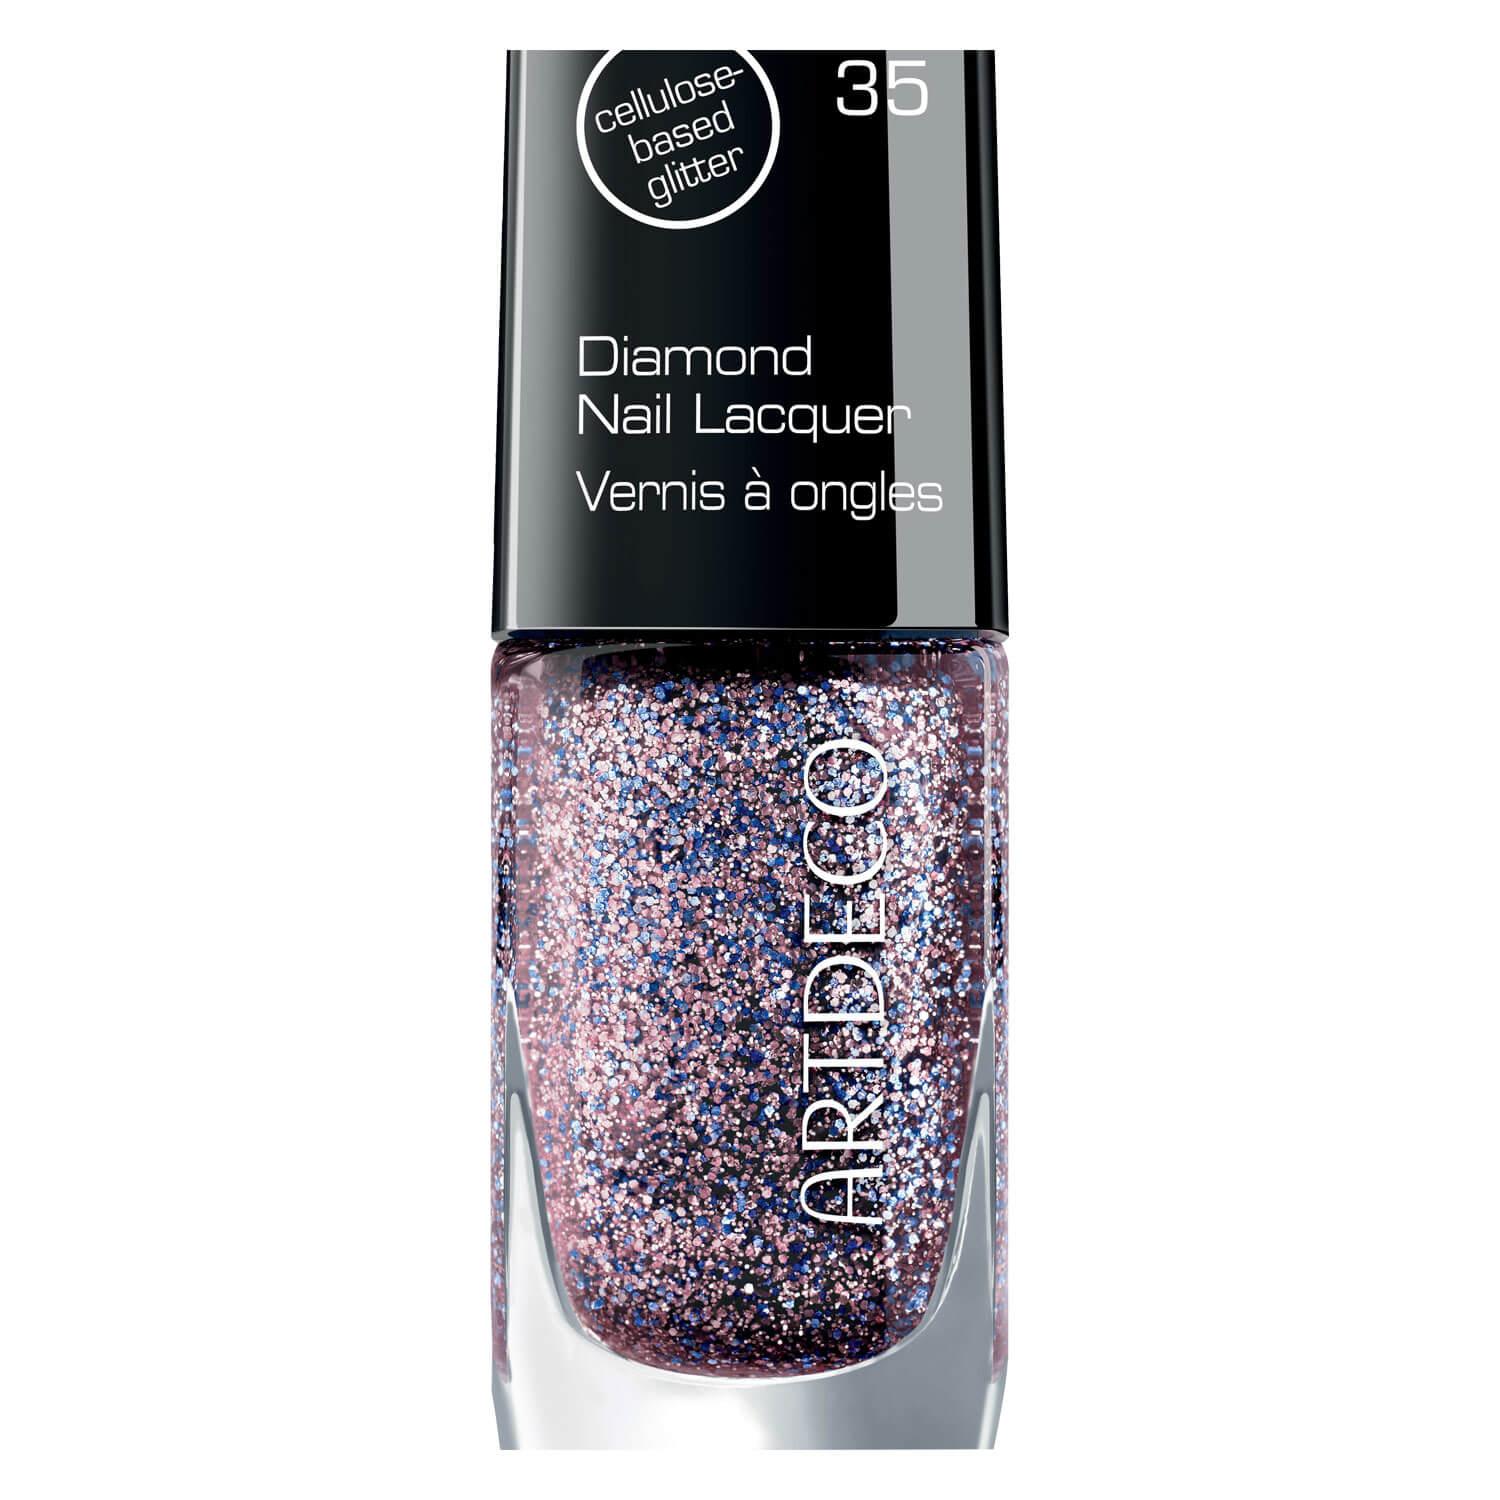 Dream of Diamonds - Nail Lacquer Rose Gold Reflection 30